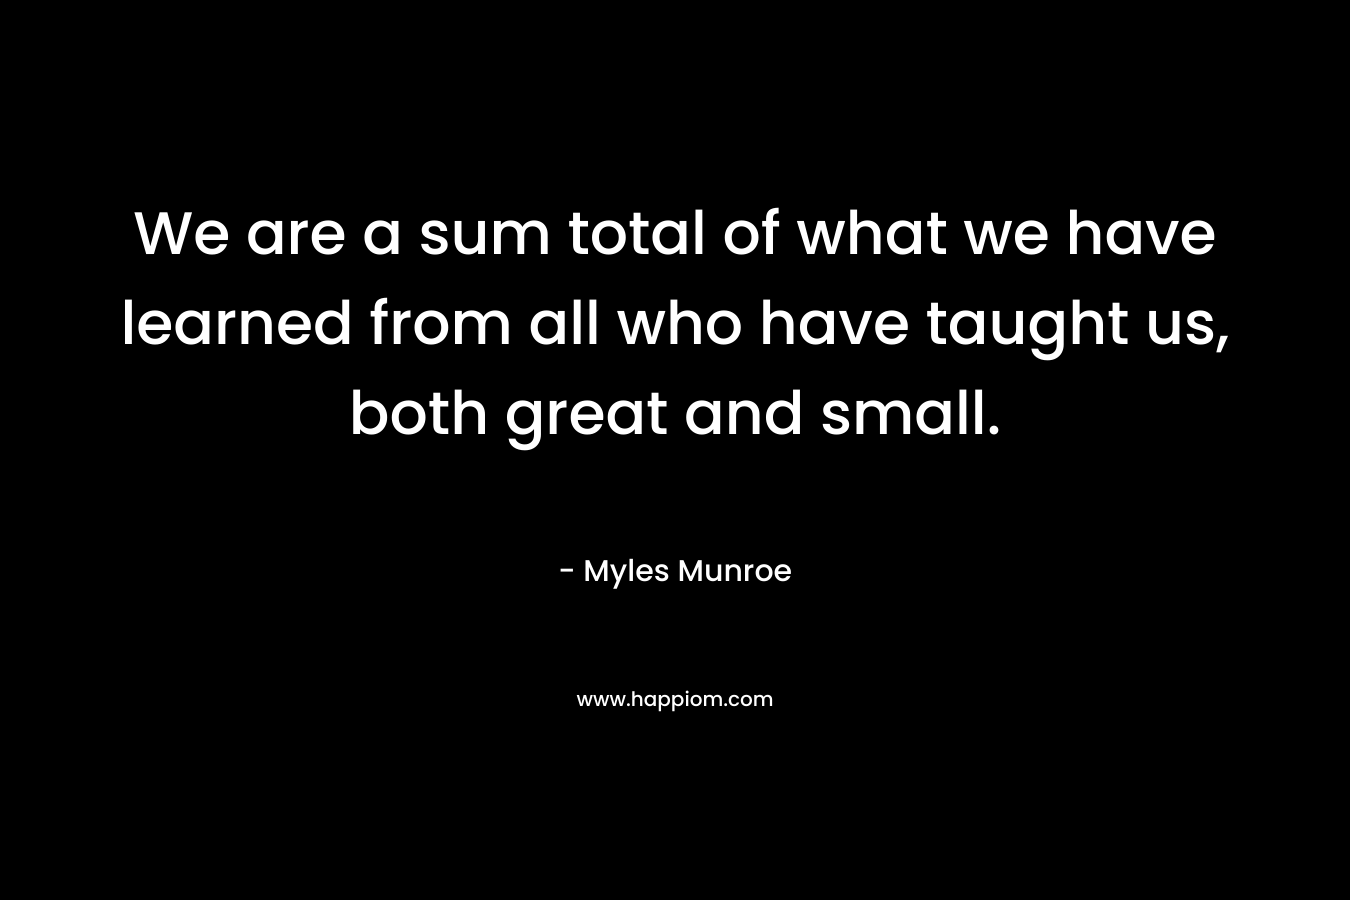 We are a sum total of what we have learned from all who have taught us, both great and small. – Myles Munroe